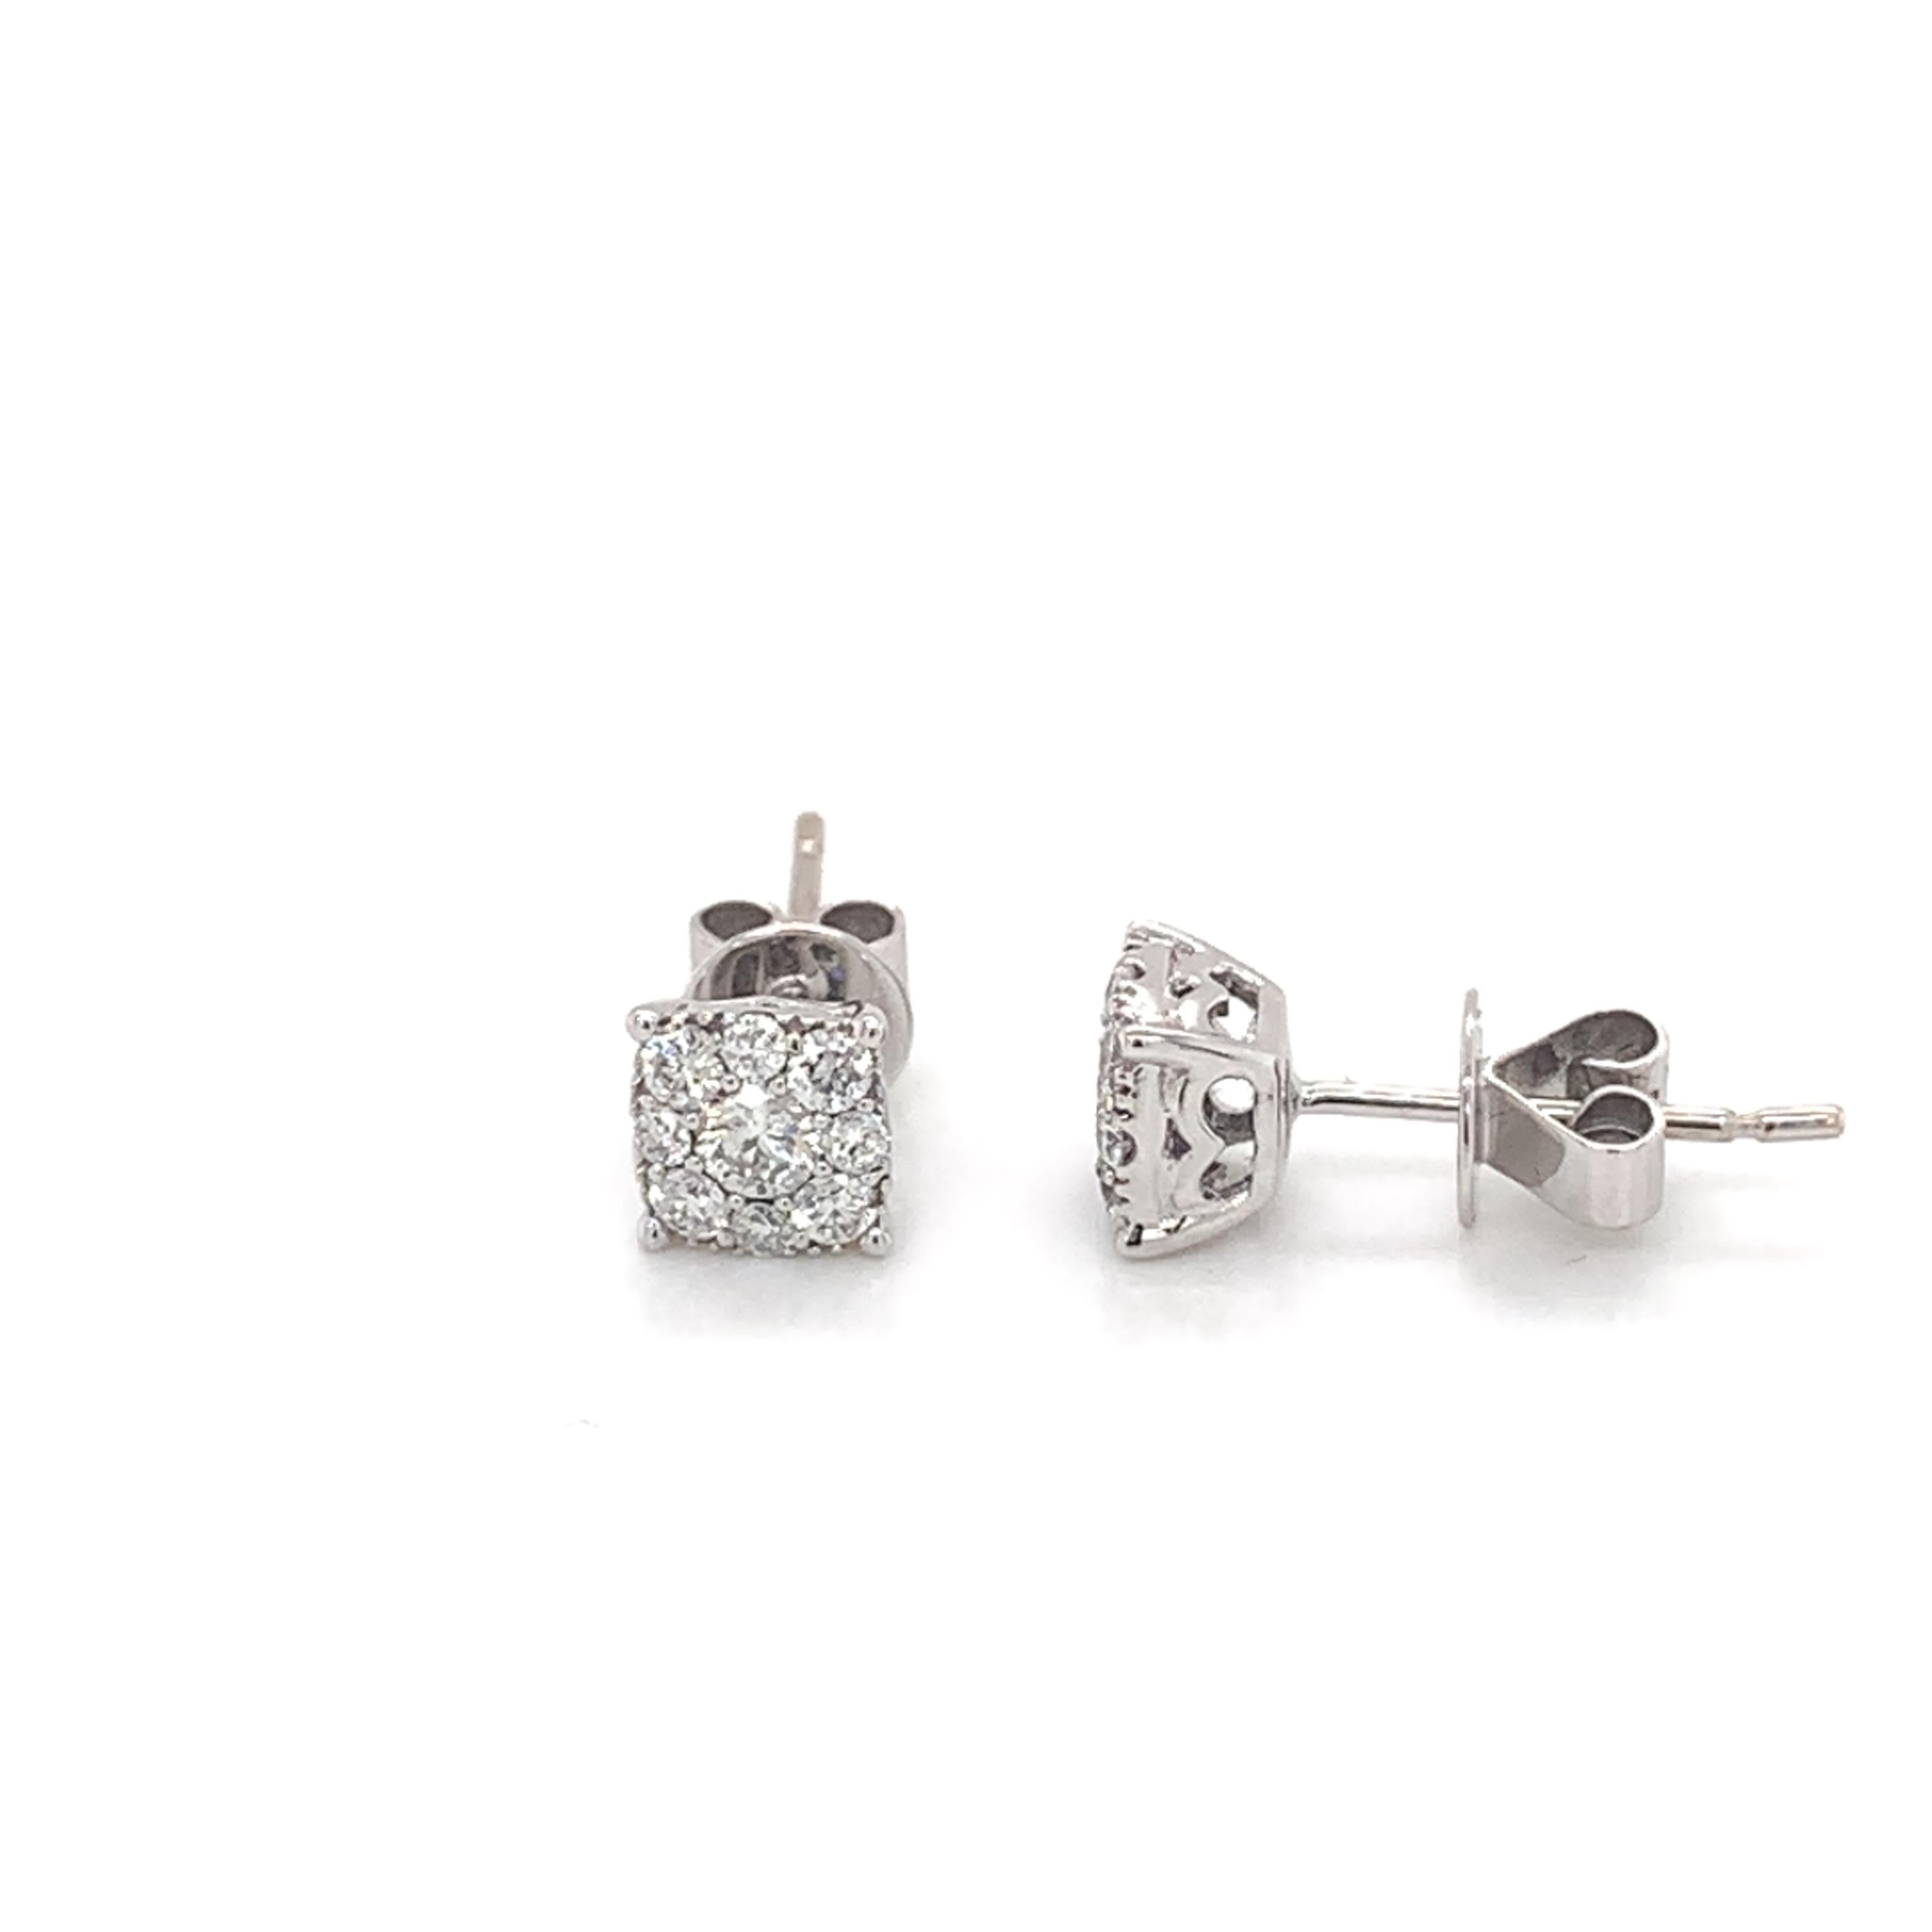 Square Diamond Stud Earrings made with real/natural brilliant cut diamonds. Total Diamond Weight: 0.54cts. Diamond Quantity: 18 round diamonds. Color: G-H. Clarity: VS. Mounted on 18kt white gold push-back setting.